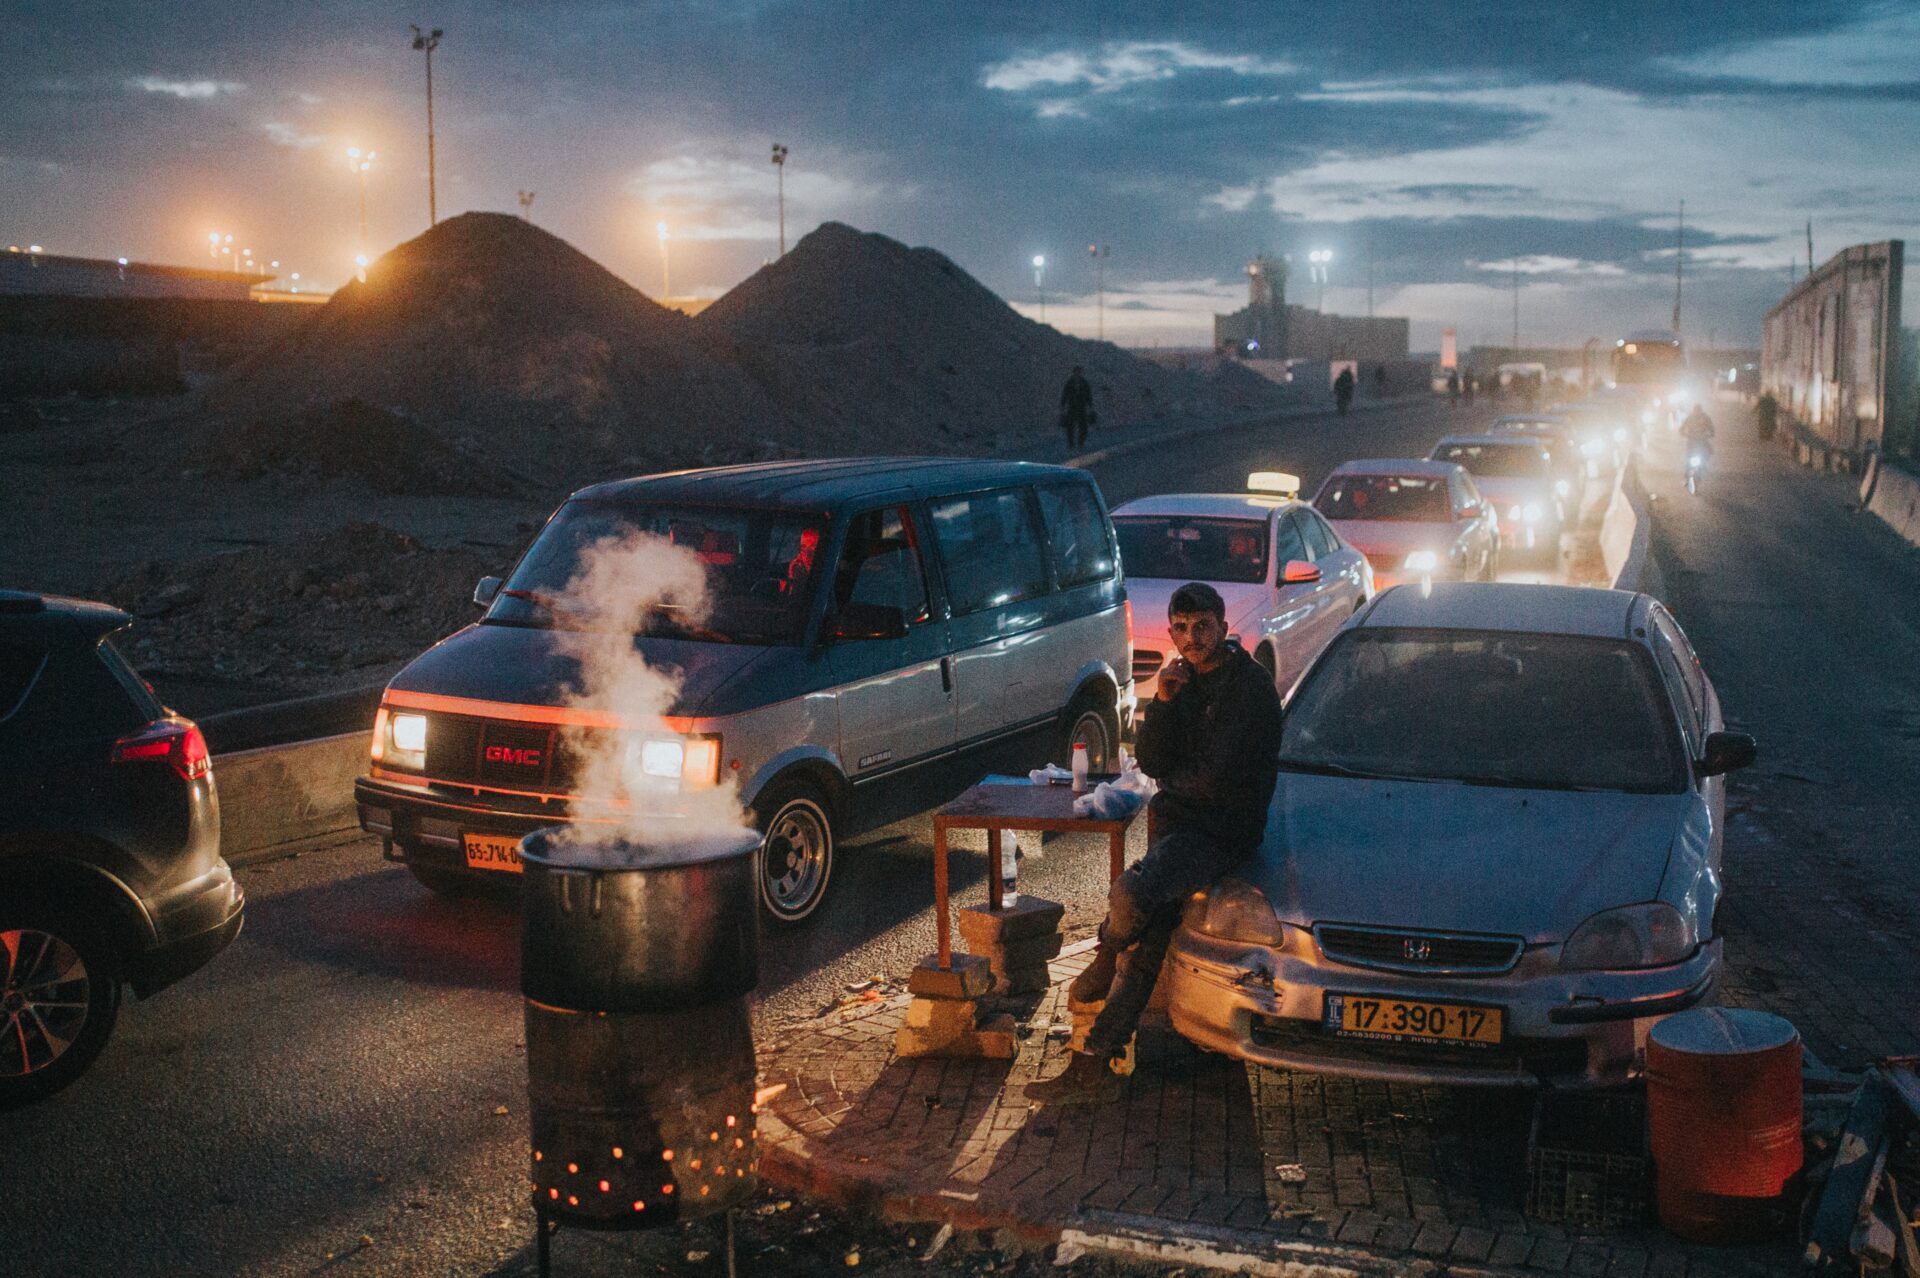 A man waiting by lines of cars going through a checkpoint from Ramallah, Palestine to enter Israel. Published on Unsplash on Nov. 15, 2018 (Cole Keister)